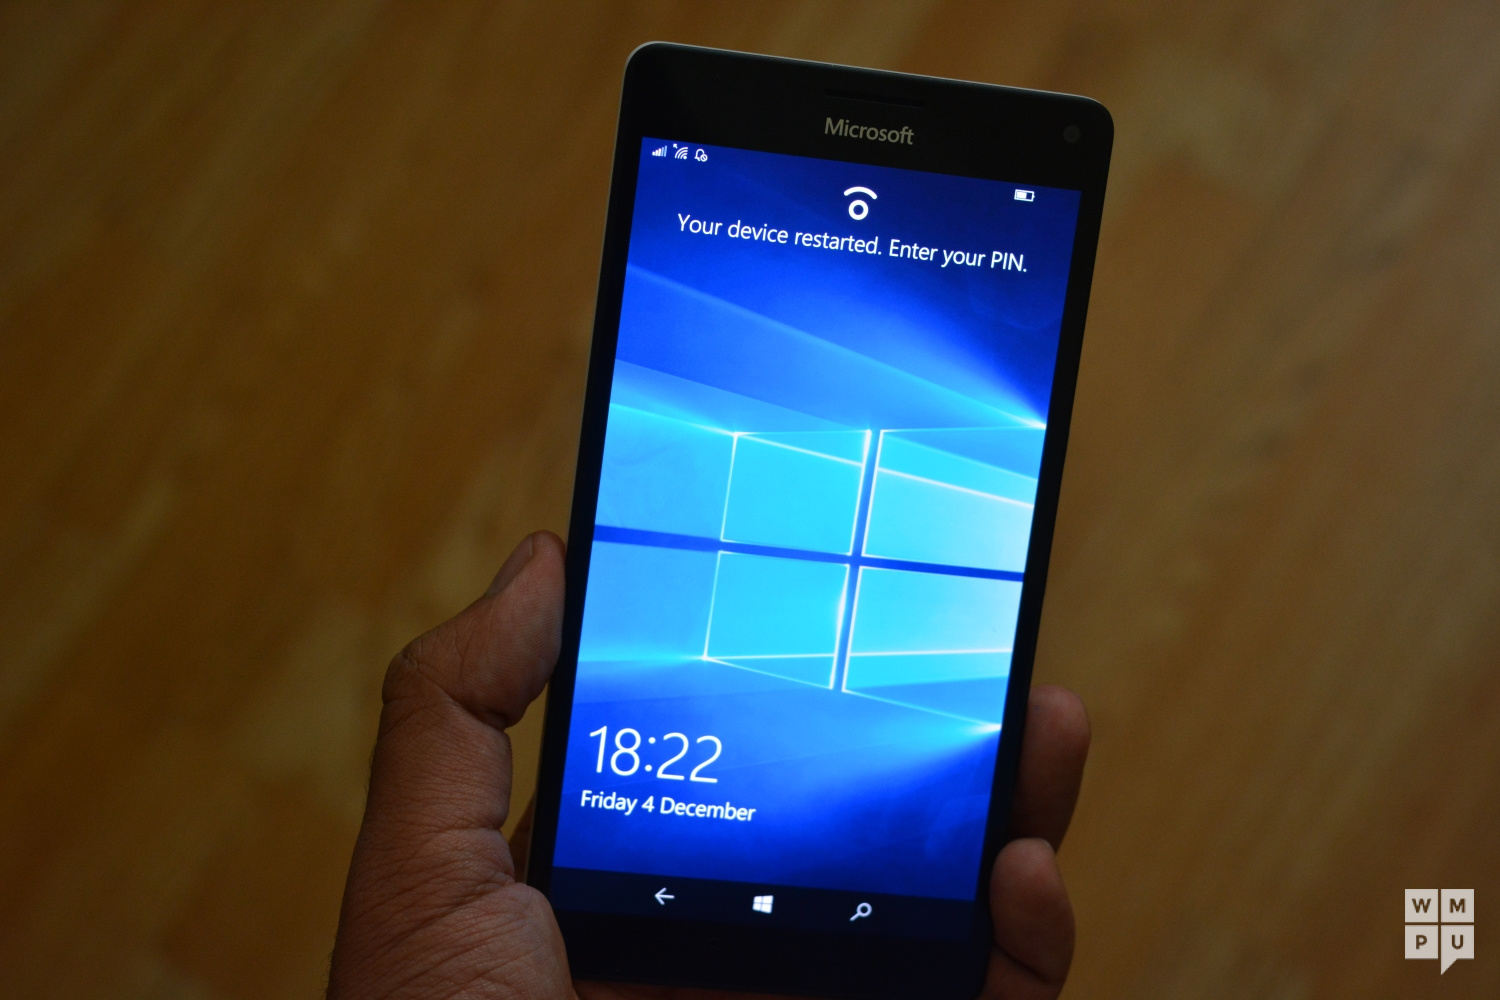 Microsoft close to solving issue preventing some Lumia 950 and Lumia 950 XL from upgrading to 10586.29